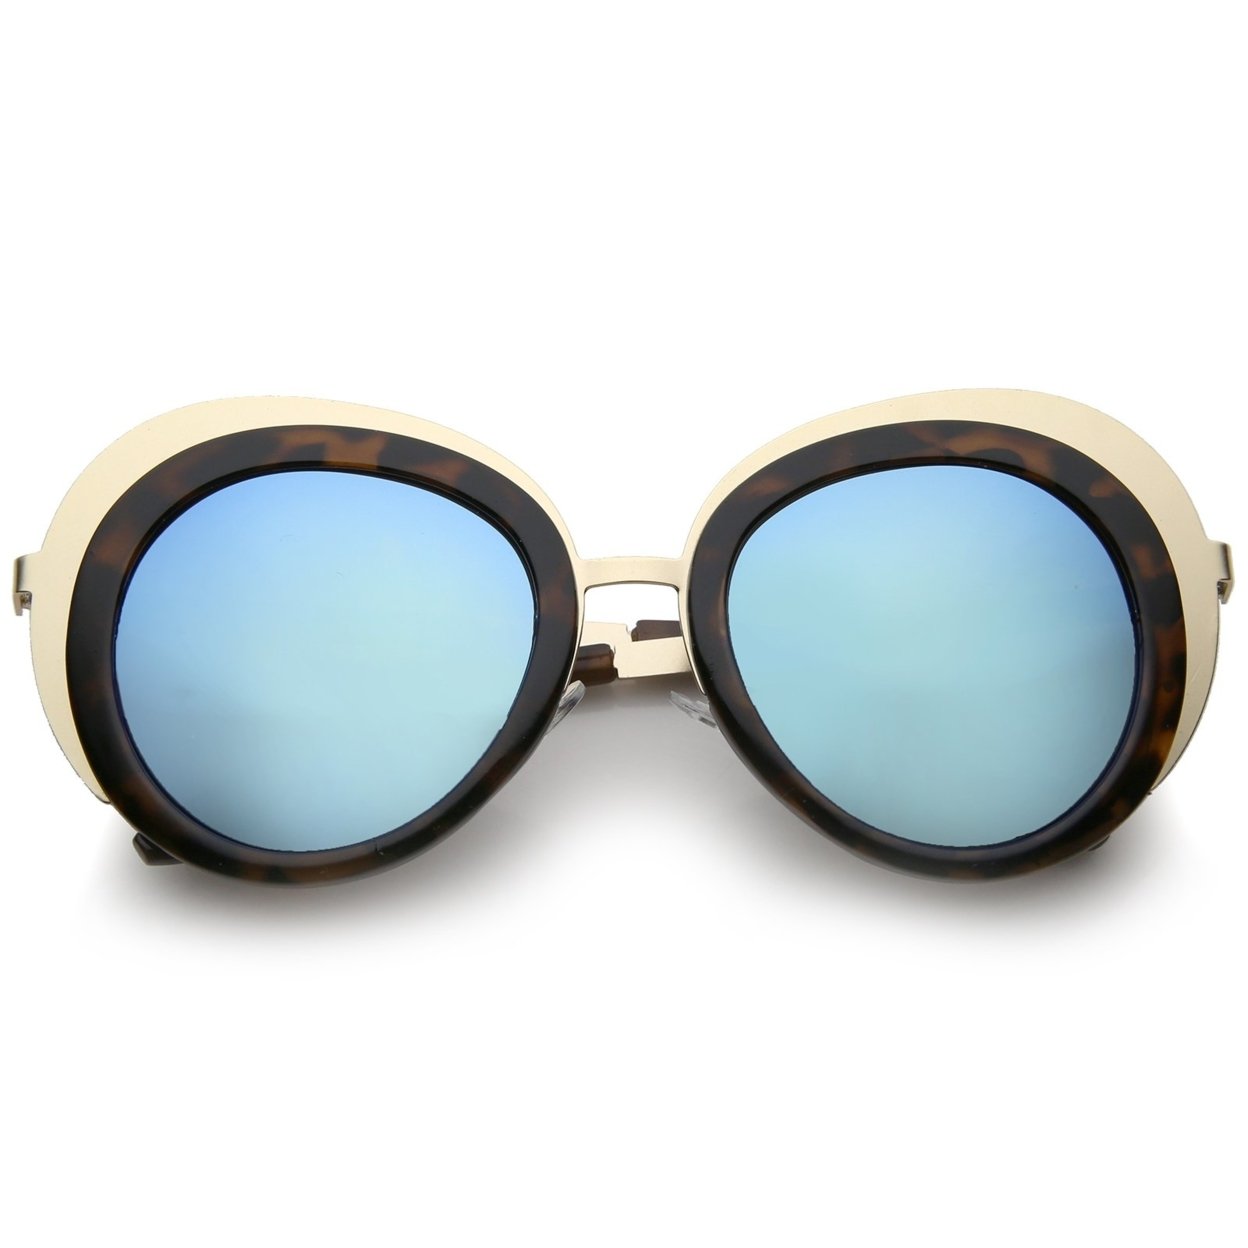 Women's Two-Tone Metal Backing Colored Mirror Lens Round Sunglasses 50mm - Gold-Tortoise / Blue Mirror